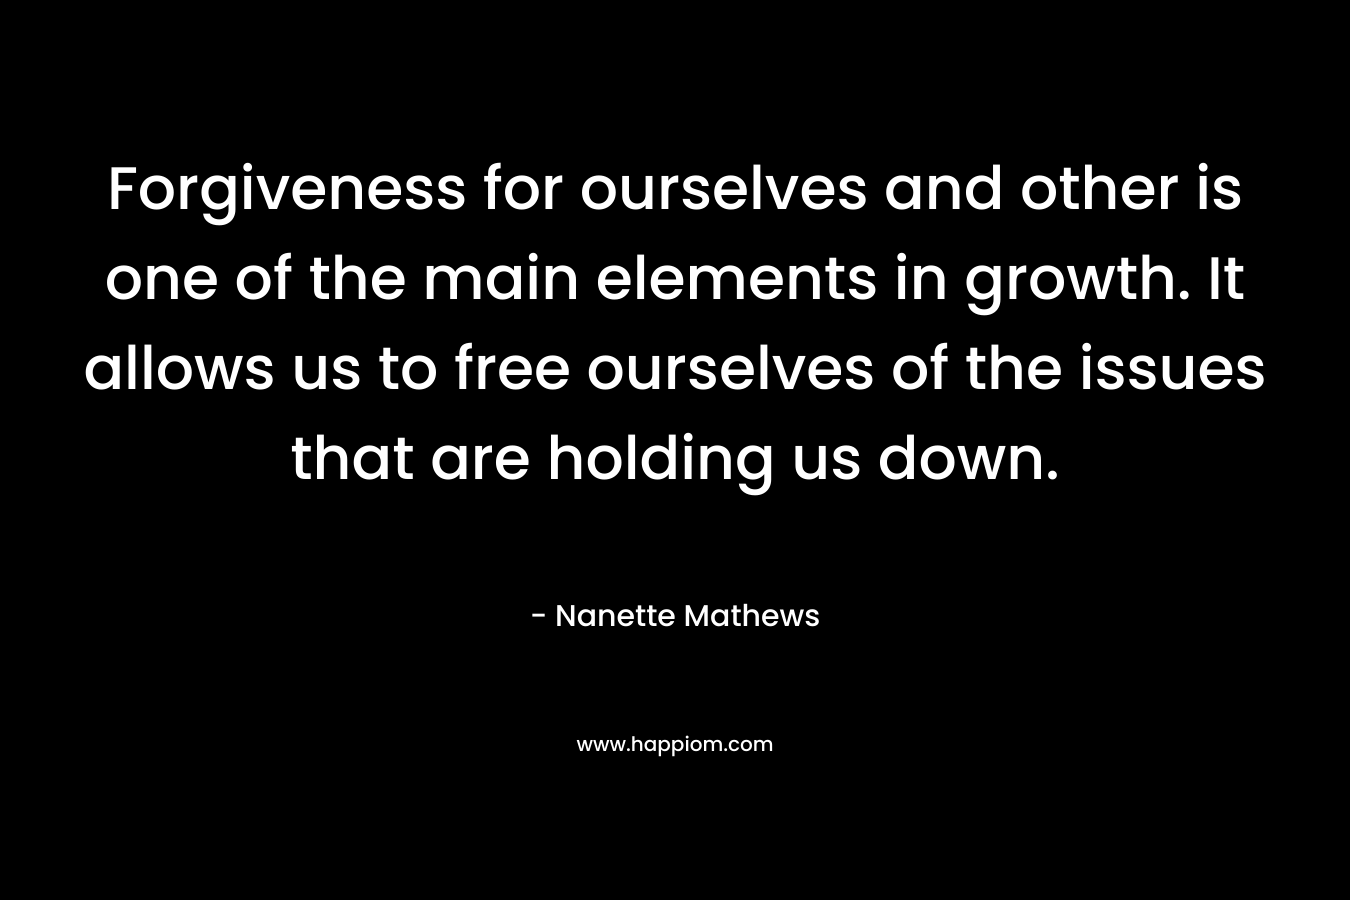 Forgiveness for ourselves and other is one of the main elements in growth. It allows us to free ourselves of the issues that are holding us down.